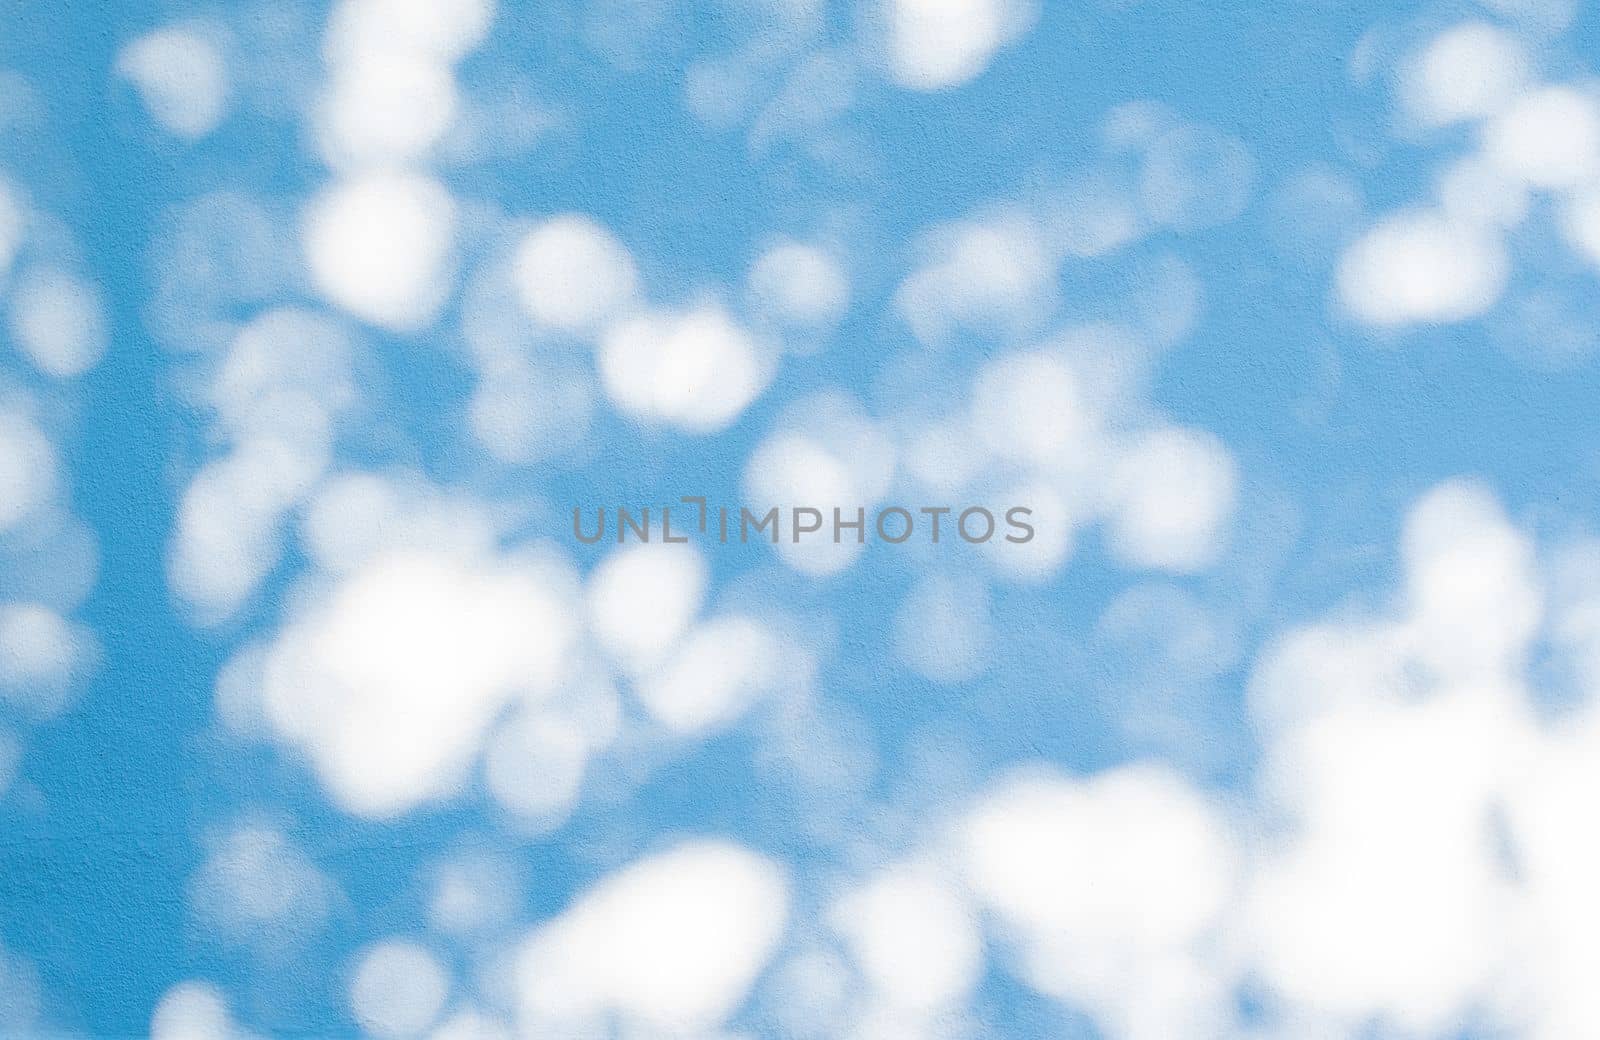 luxury white and blue bokeh texture on white wall background light and shadows by KaterinaDalemans